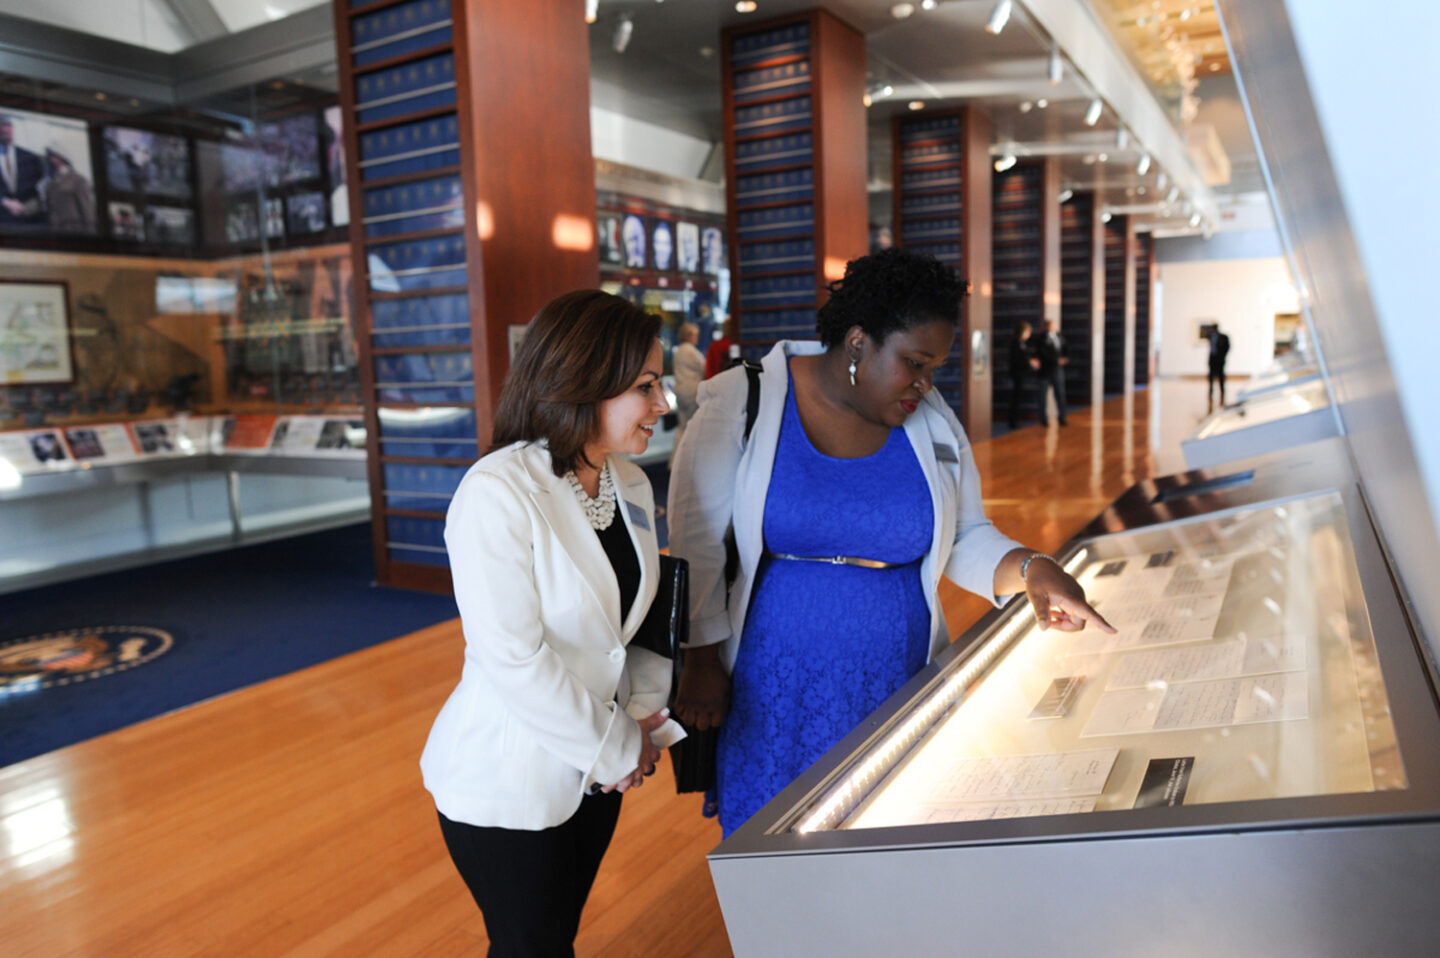 Two individuals look at documents in a case at the Clinton Presidential Center